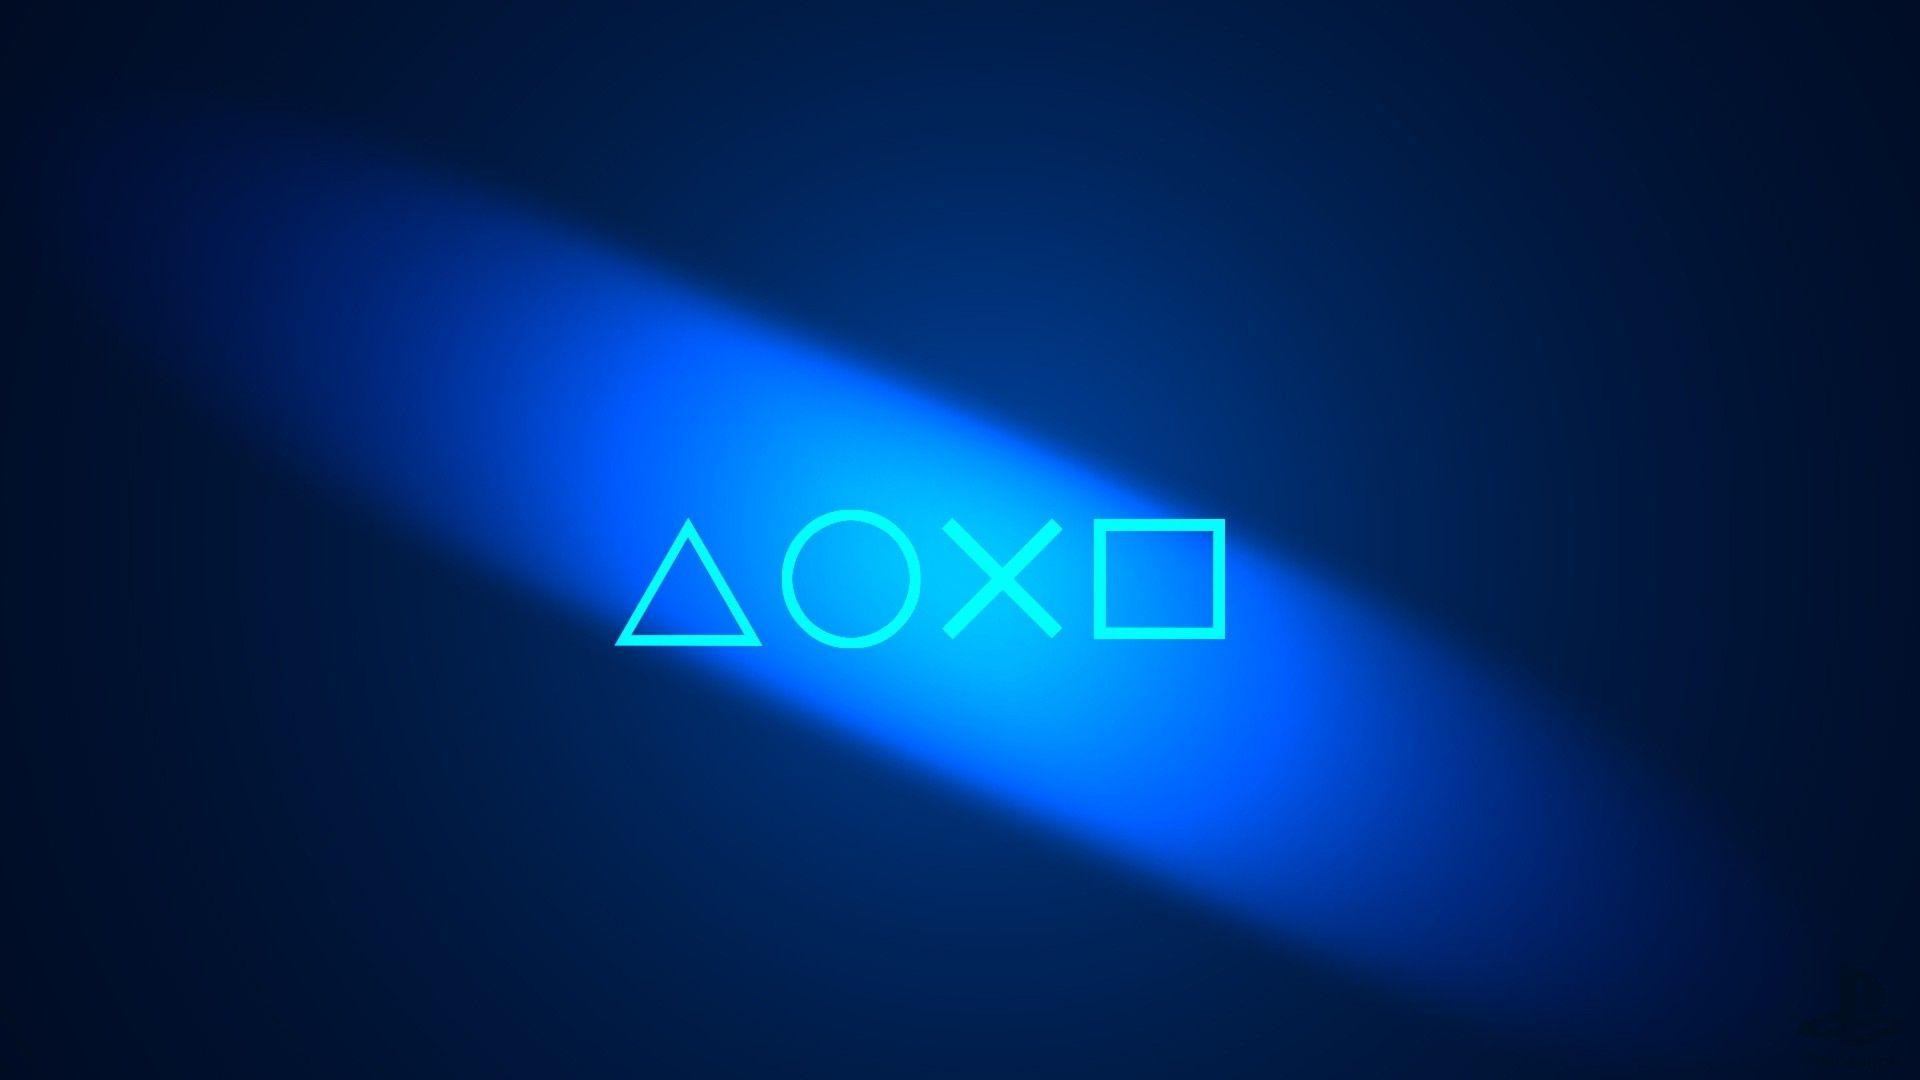 Aesthetic Ps4 Wallpapers - Wallpaper Cave